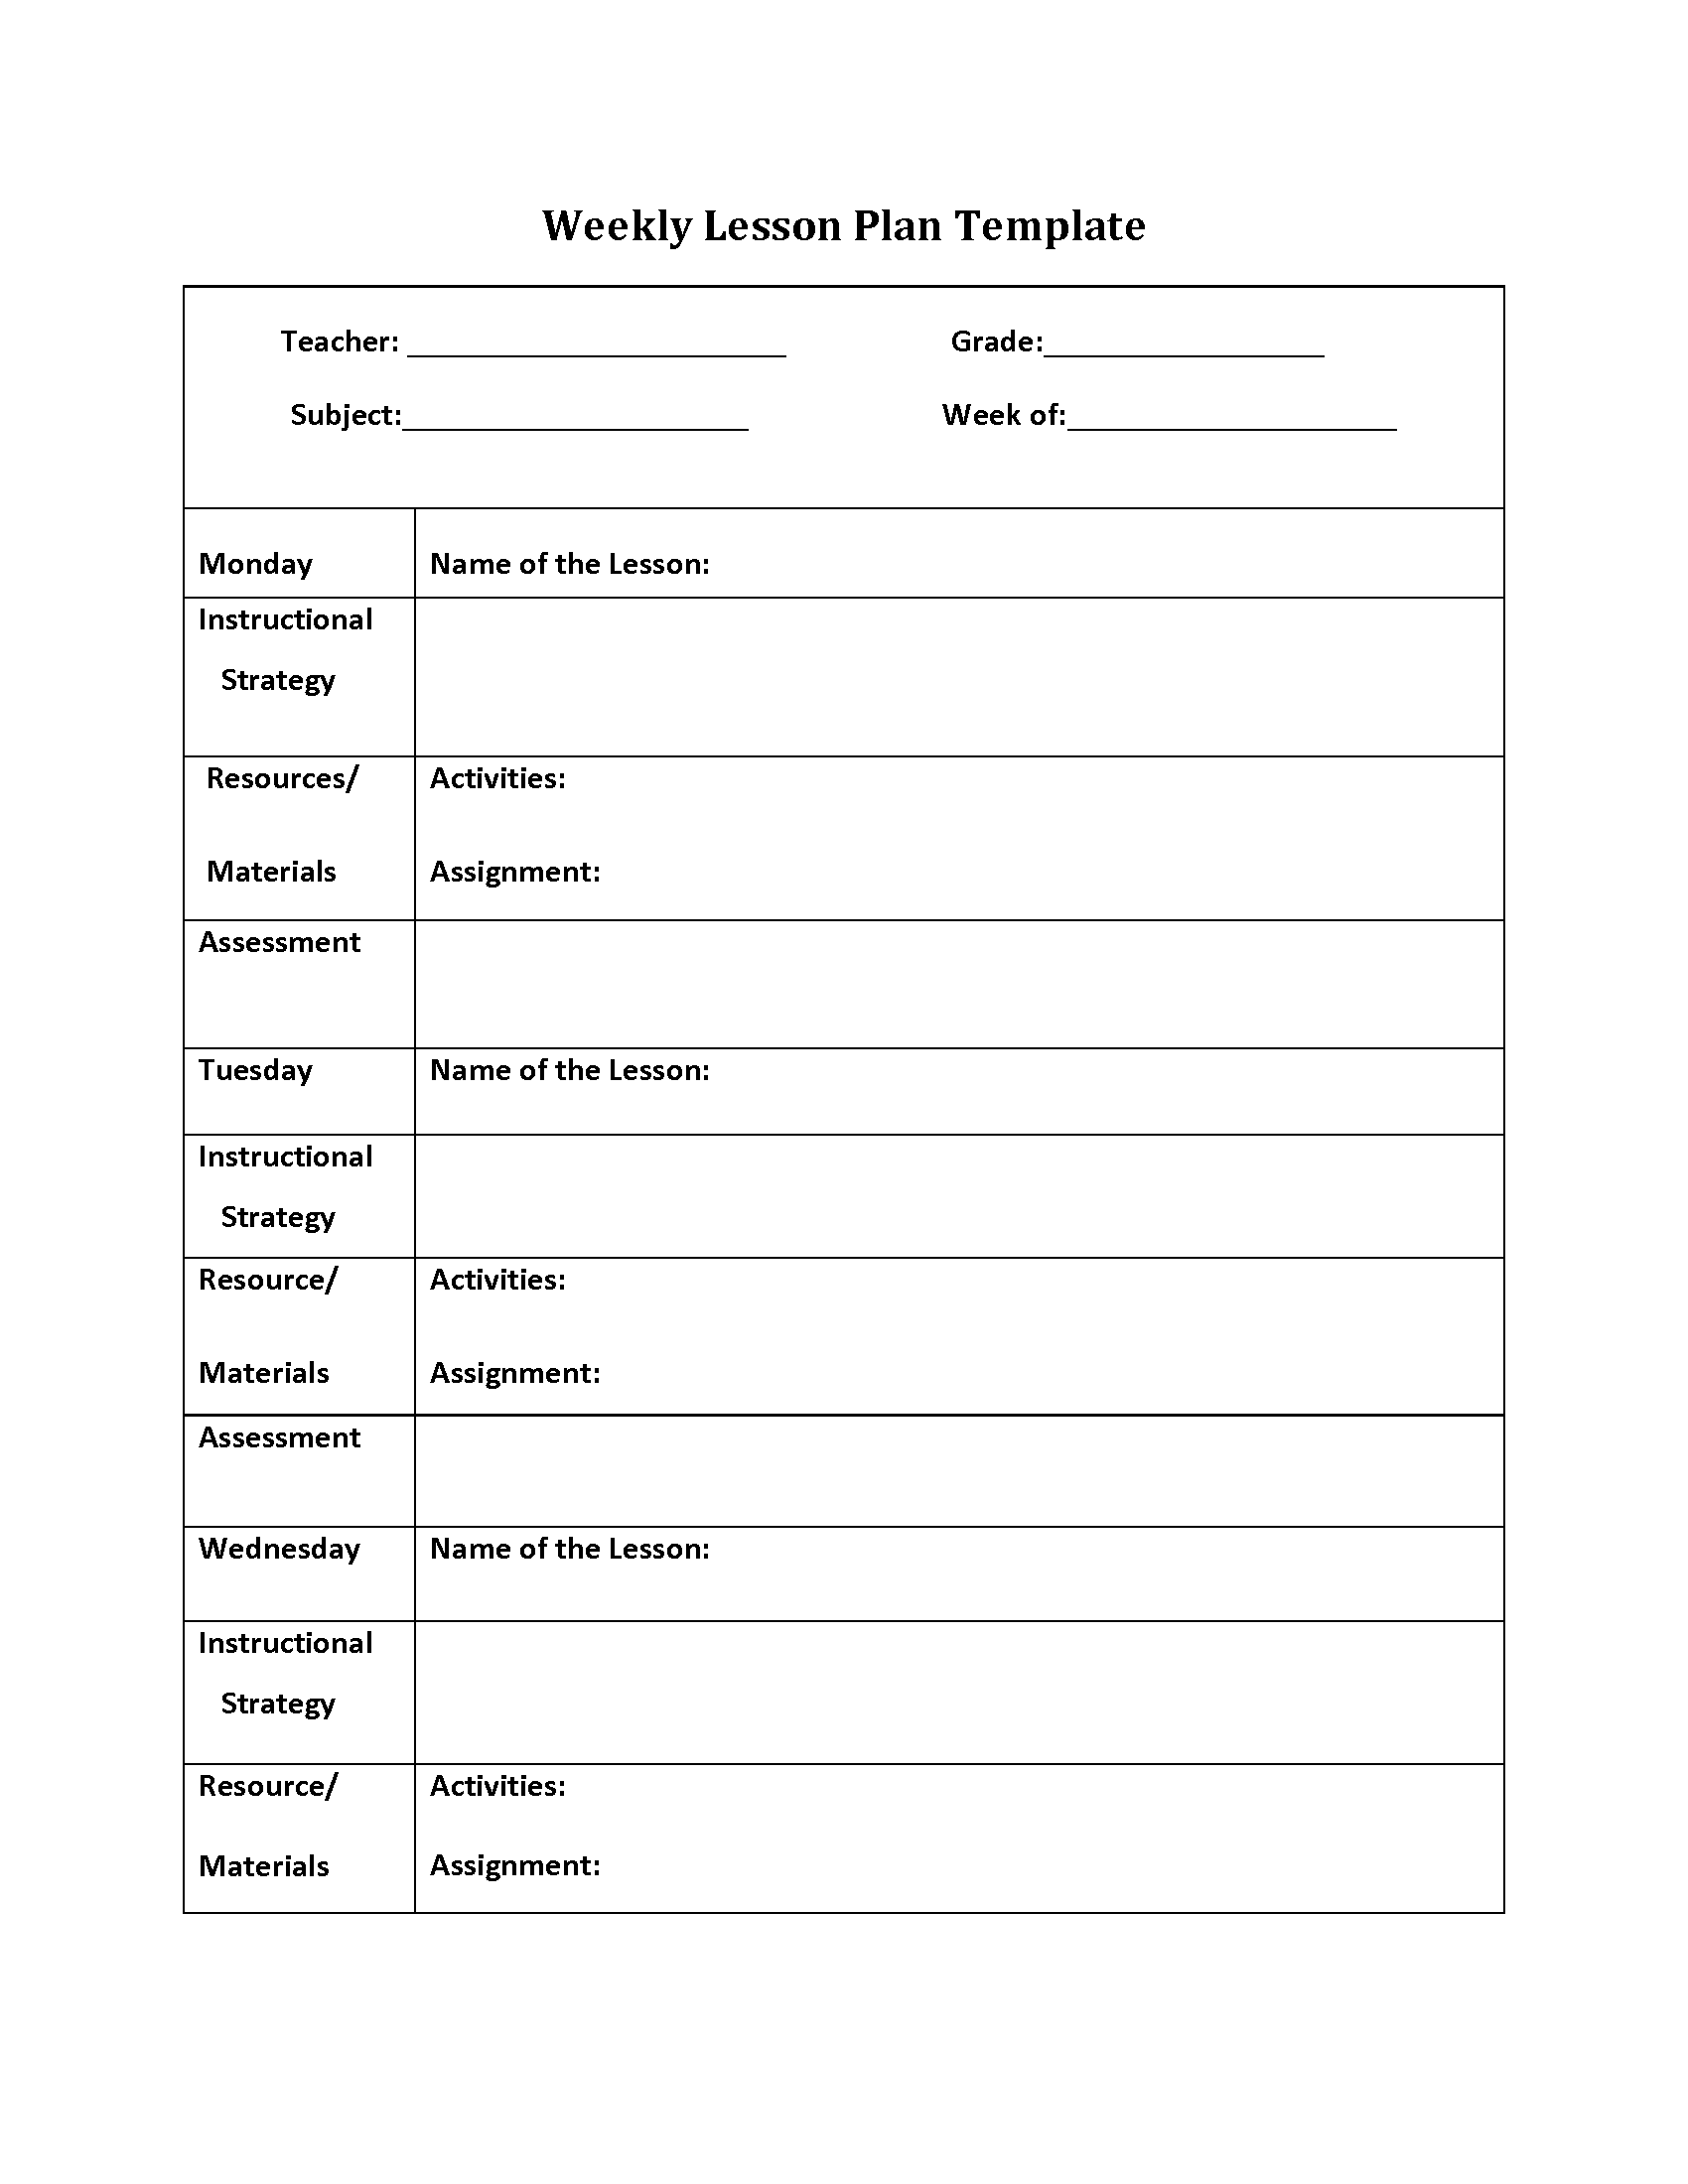 Practicing Weekly Lesson Plan Template